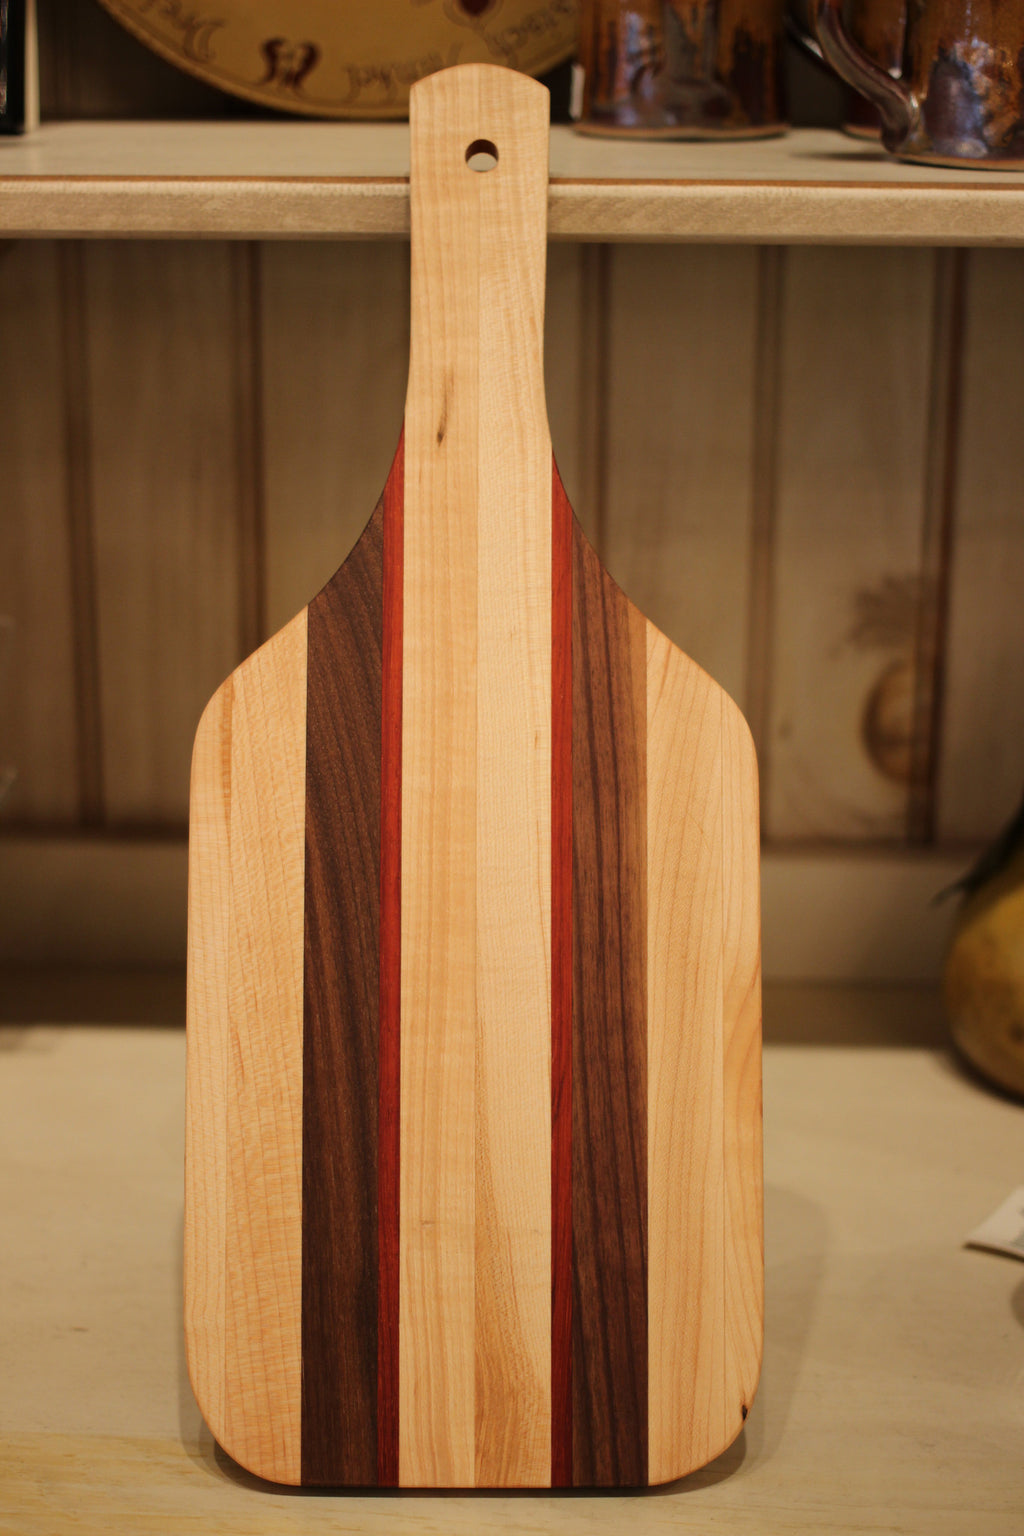 Small Striped Cutting Board with Handle in Maple - Size 6"x17"